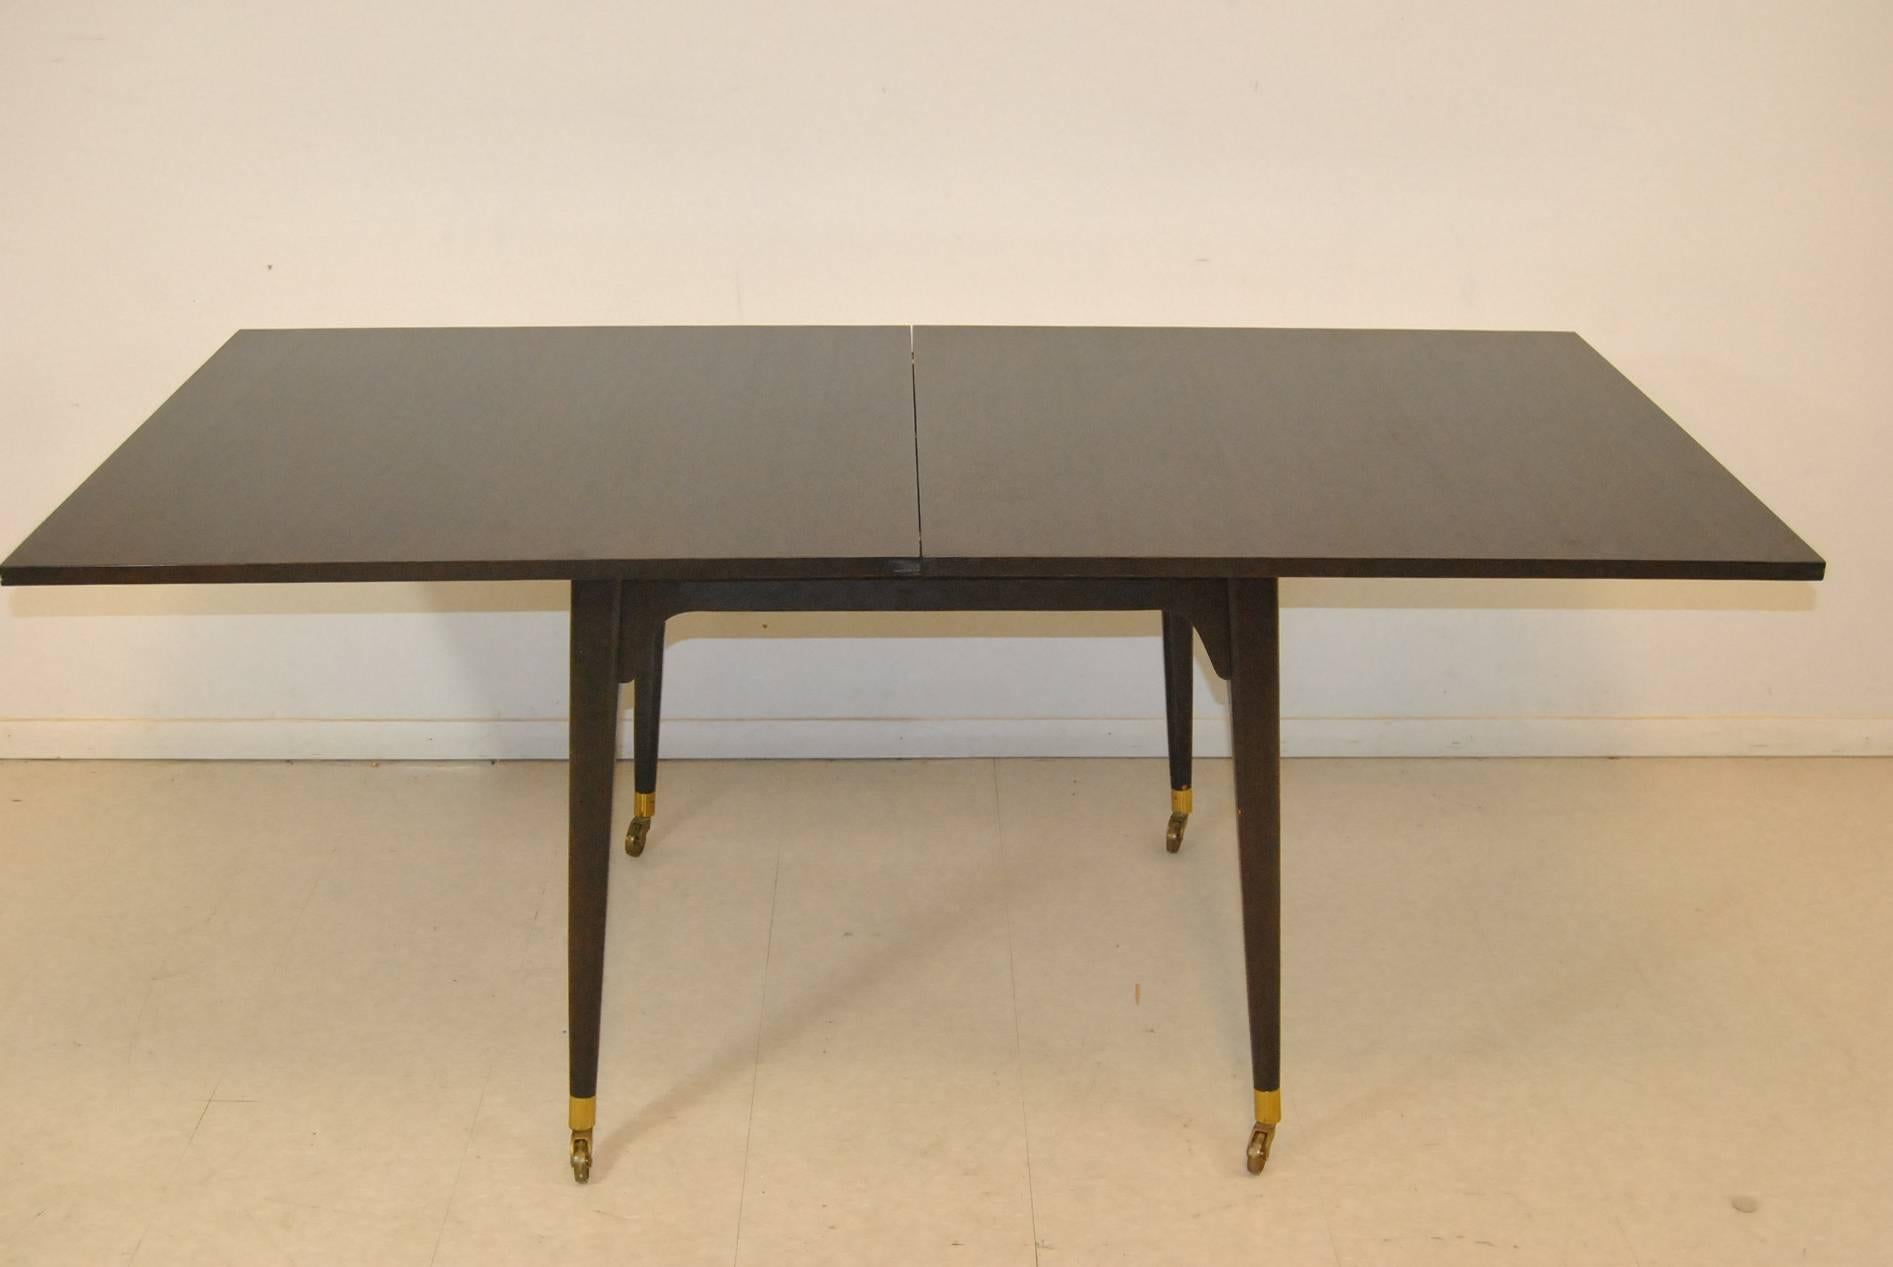 A Mid-Century Modern flip-top game table by Edward Wormley for Dunbar. This fantastic table features heavy brass caster and sleeves, an ebony stain and felt lined storage under the top. The top opens and pivots to make a larger serving surface. Very